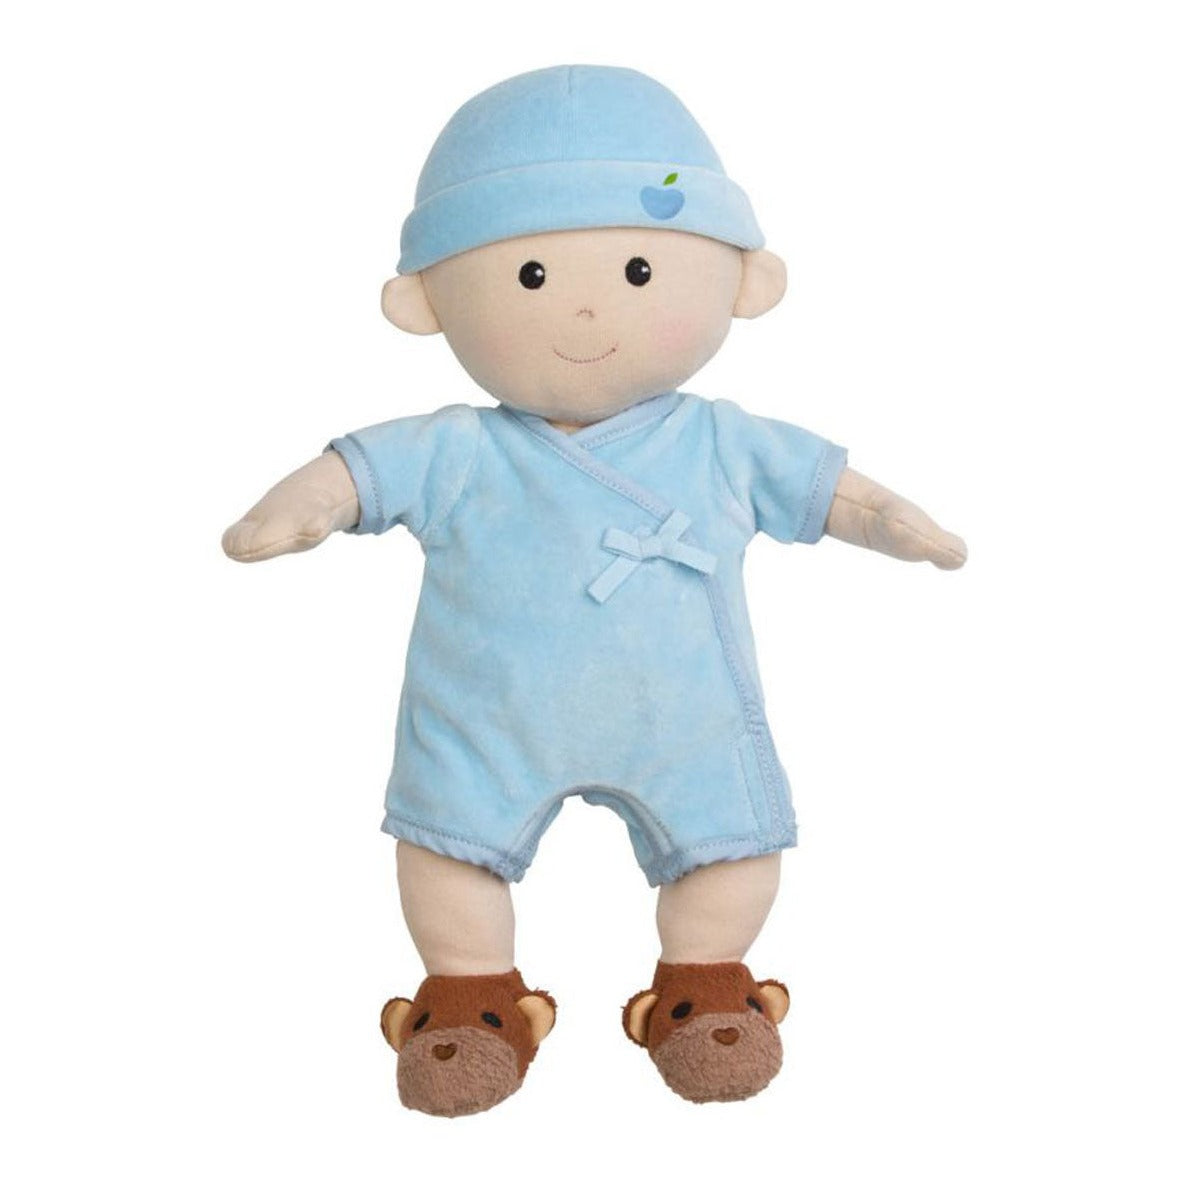 Apple park organic cotton doll - angus and dudley